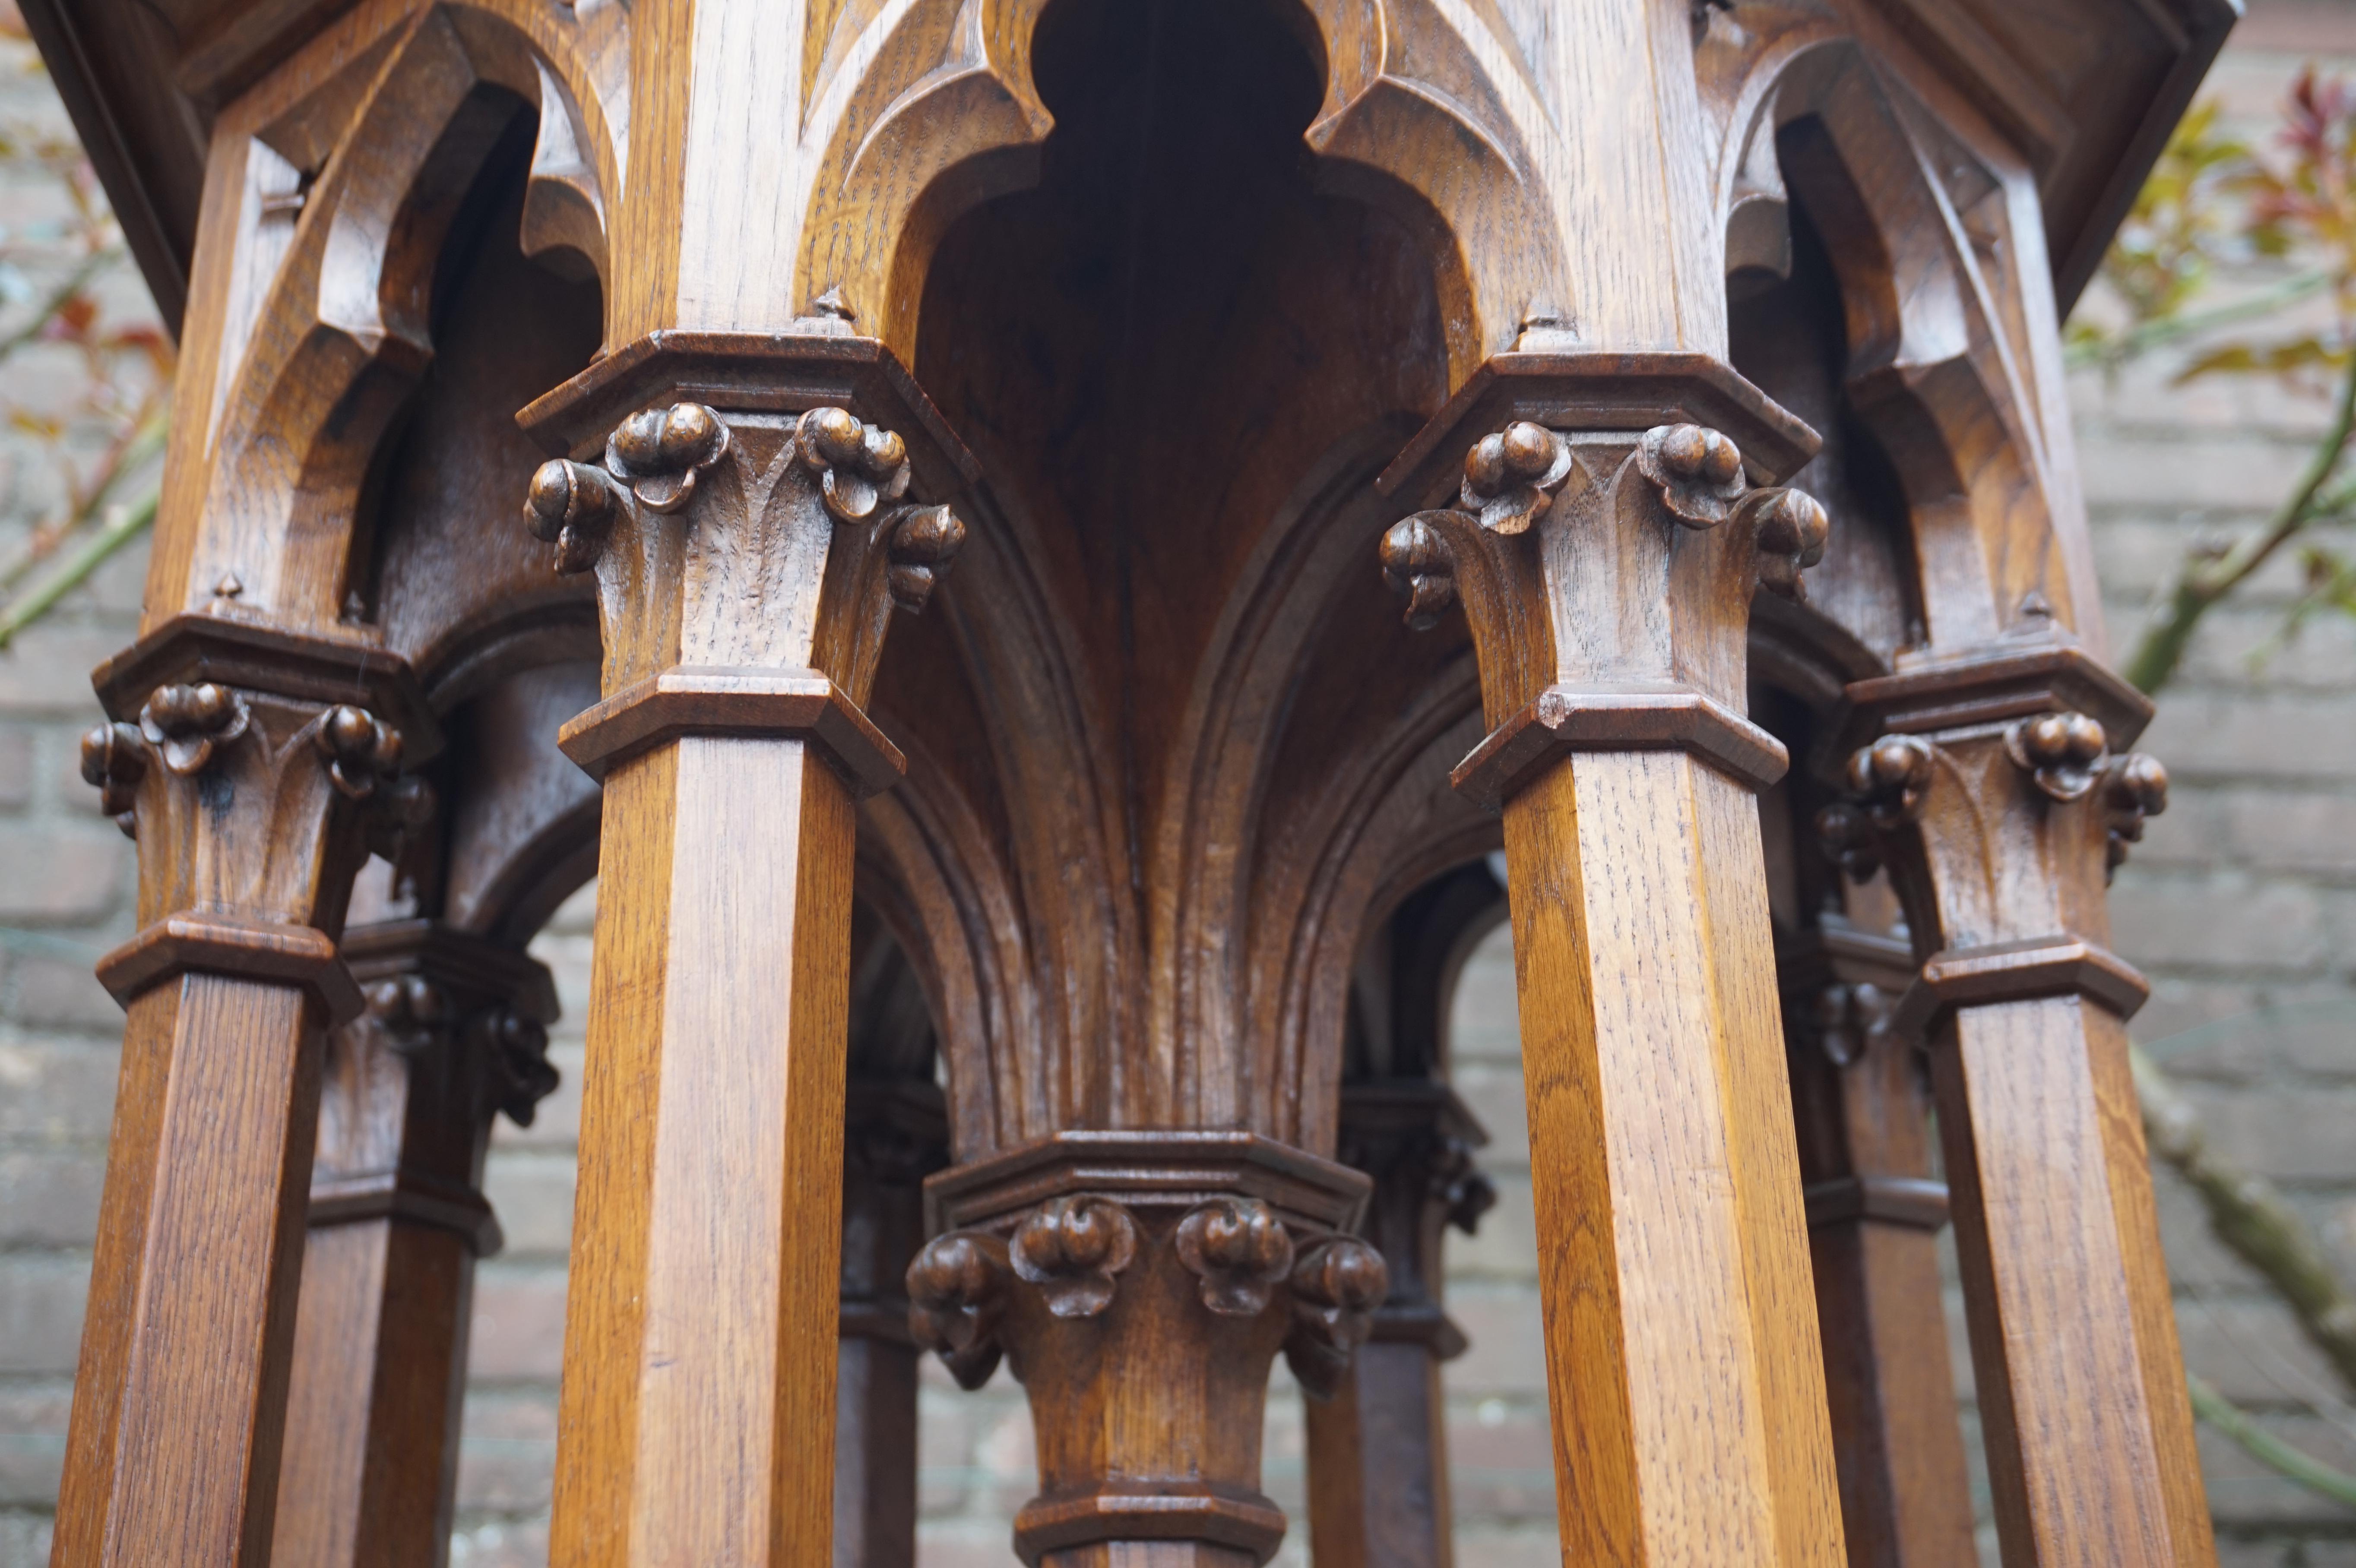 Hand-Crafted Antique & Monumental Handcarved Oak Gothic Revival Church Columns Pedestal Stand